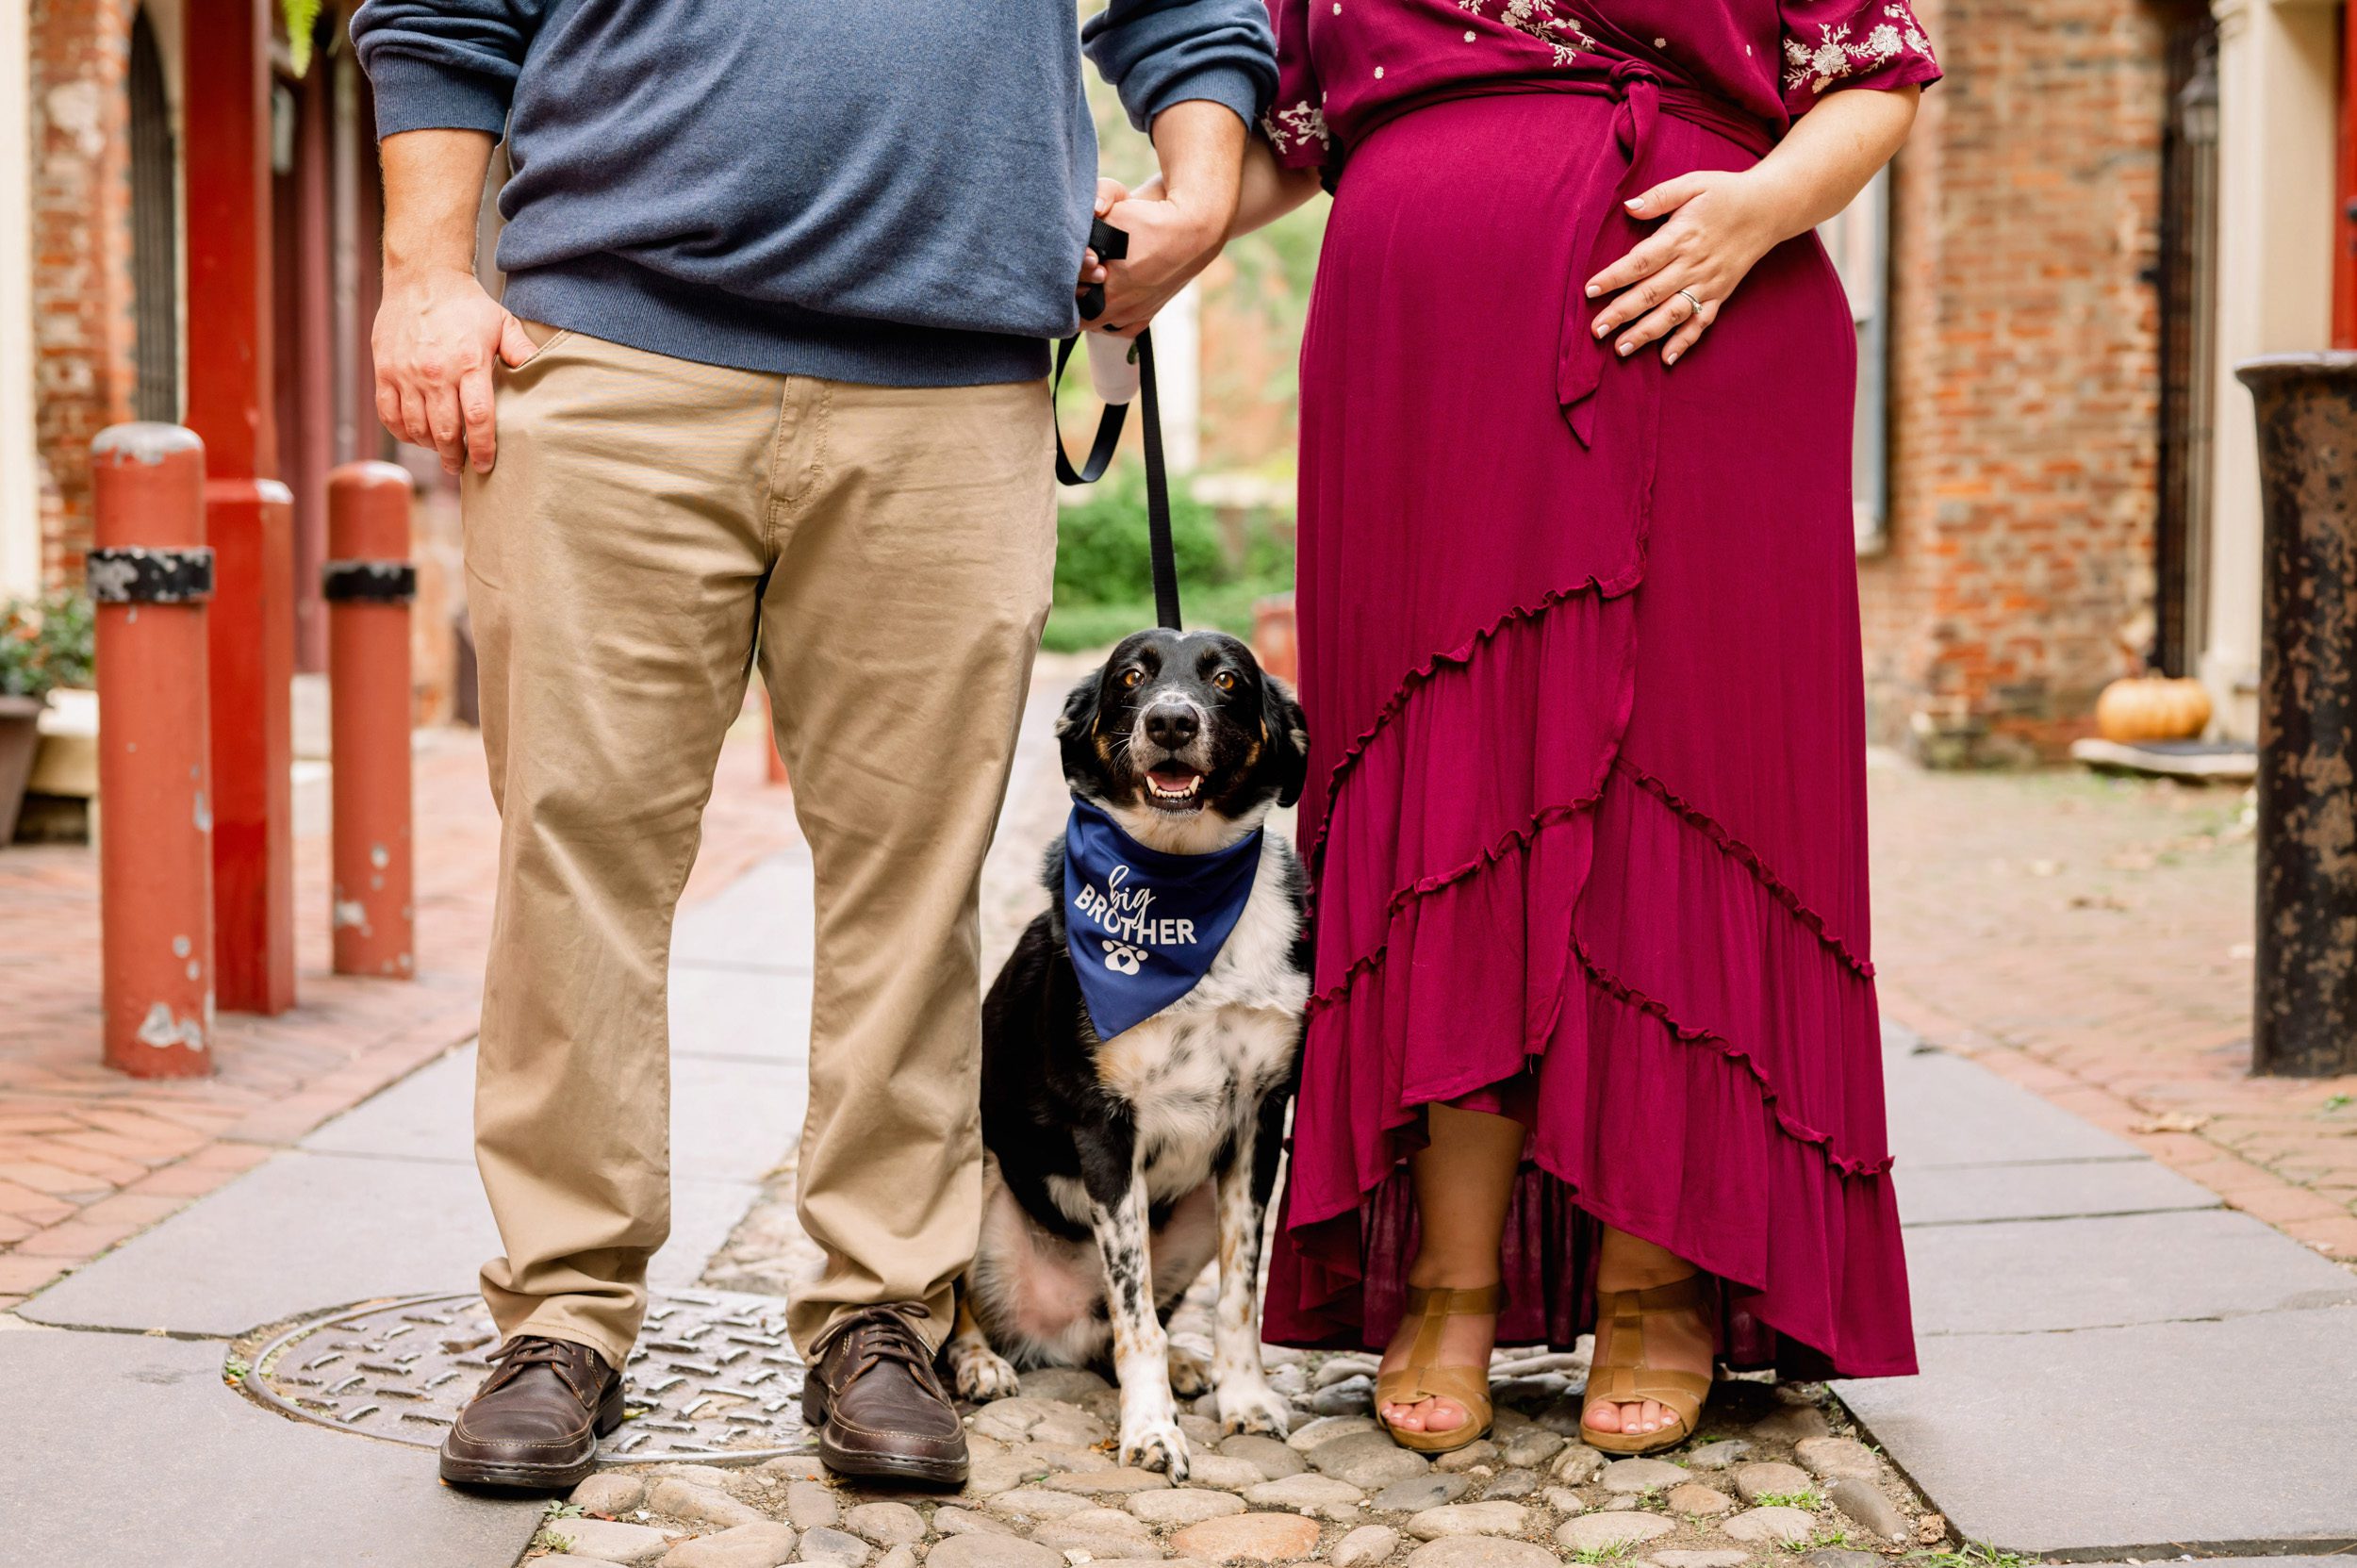 Close up maternity photo of a dog wearing a blue "Big Brother" handkerchief around his neck standing in between expecting couple during a Philadelphia maternity photoshoot